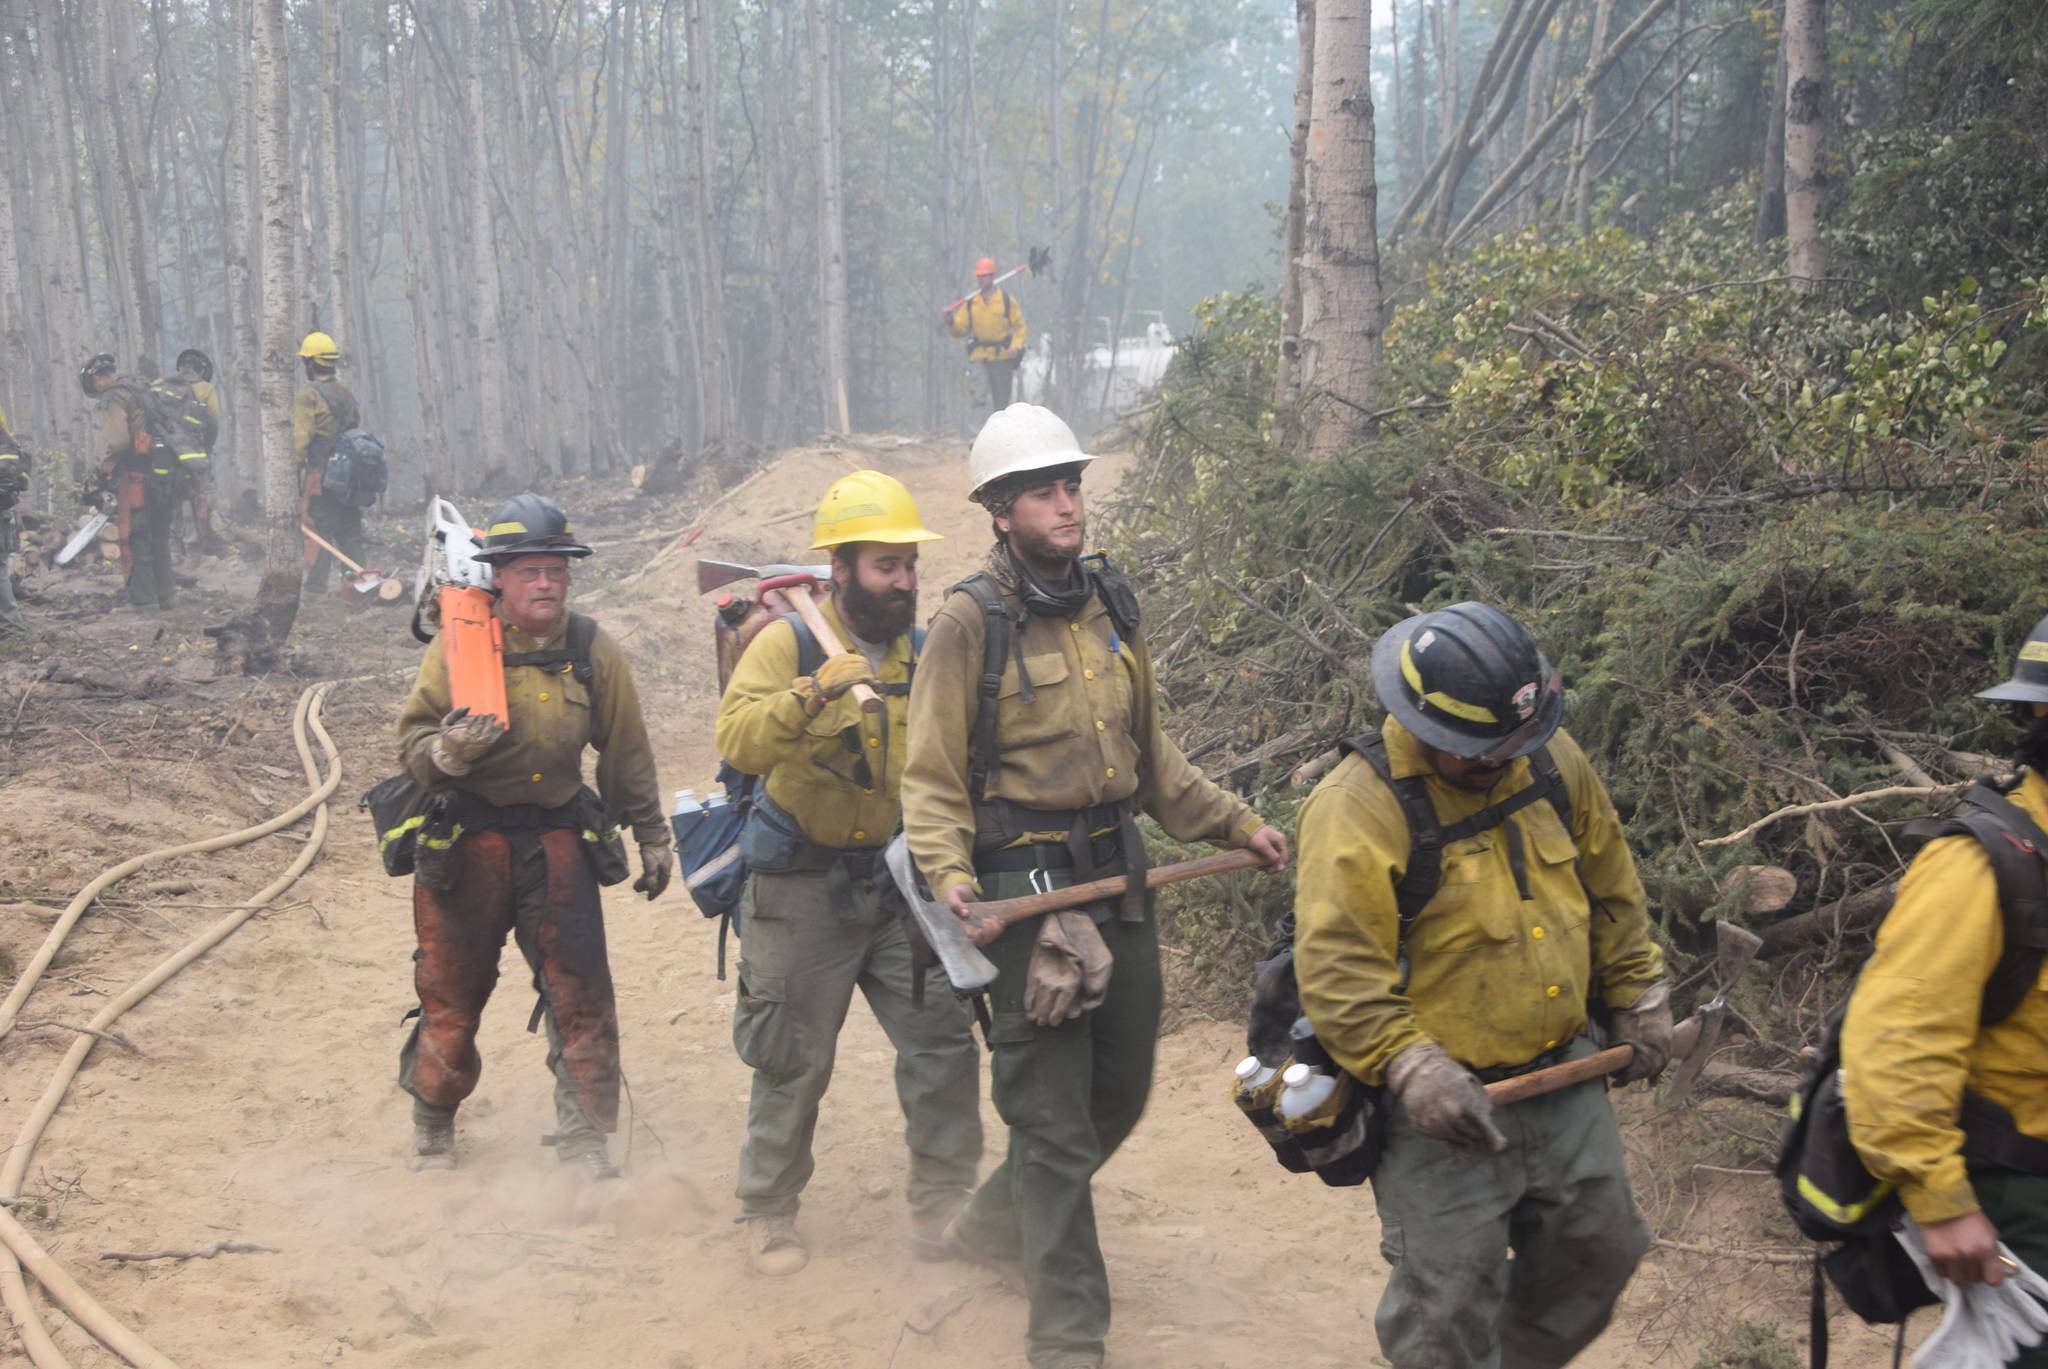 The Snake River Valley fire crew makes their way to their assignment expanding containment lines off Skilak Lake Road southeast of Sterling, Alaska on Aug. 30, 2019. (Photo by Brian Mazurek/Peninsula Clarion)